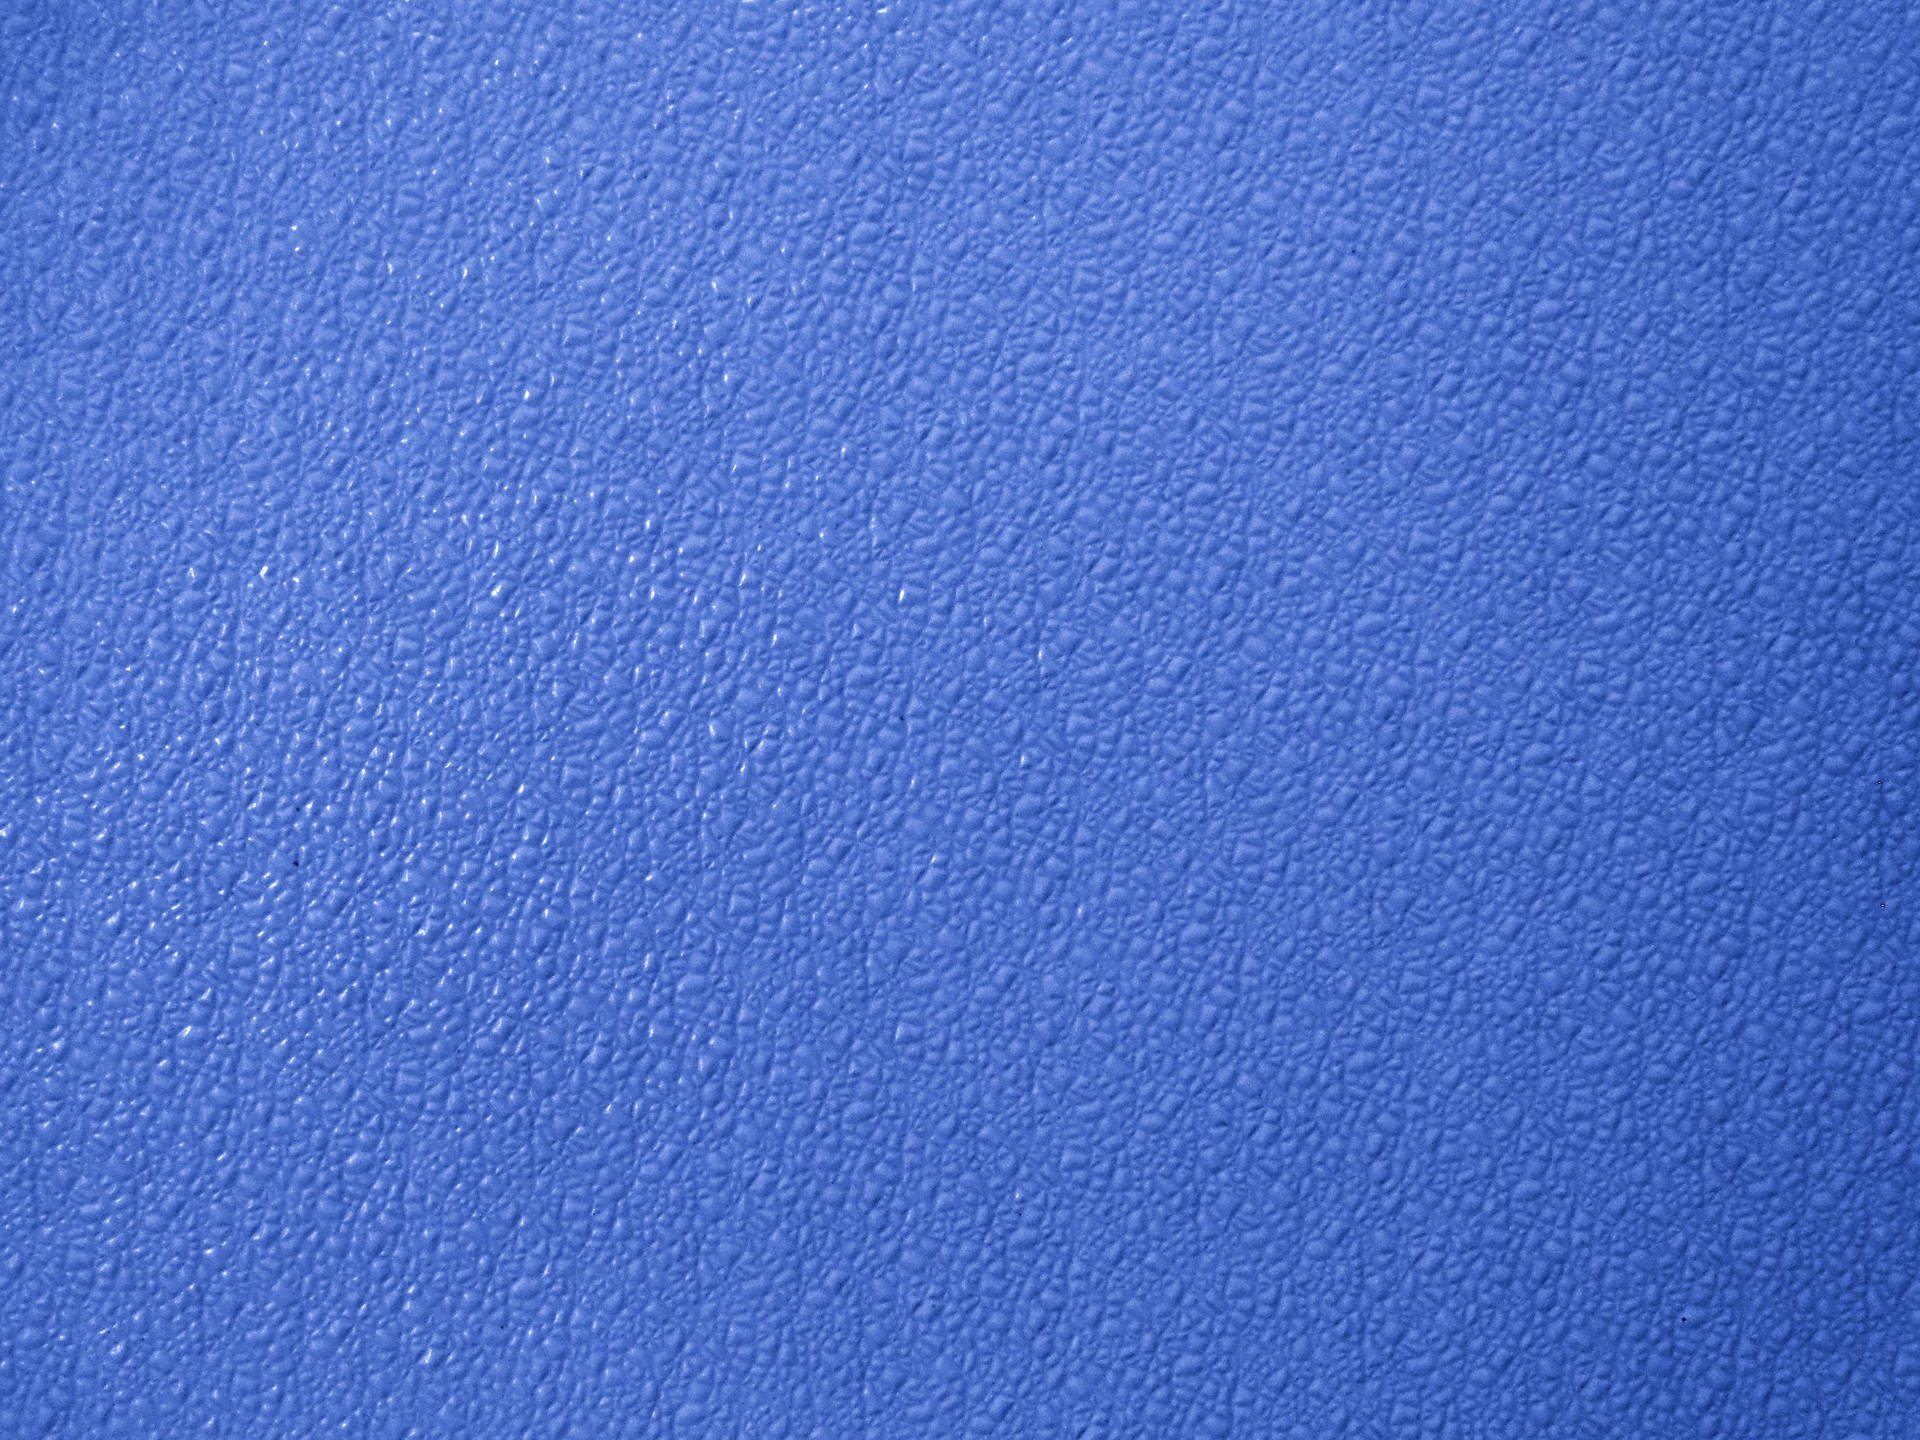 Periwinkle Blue Leather Texture Background